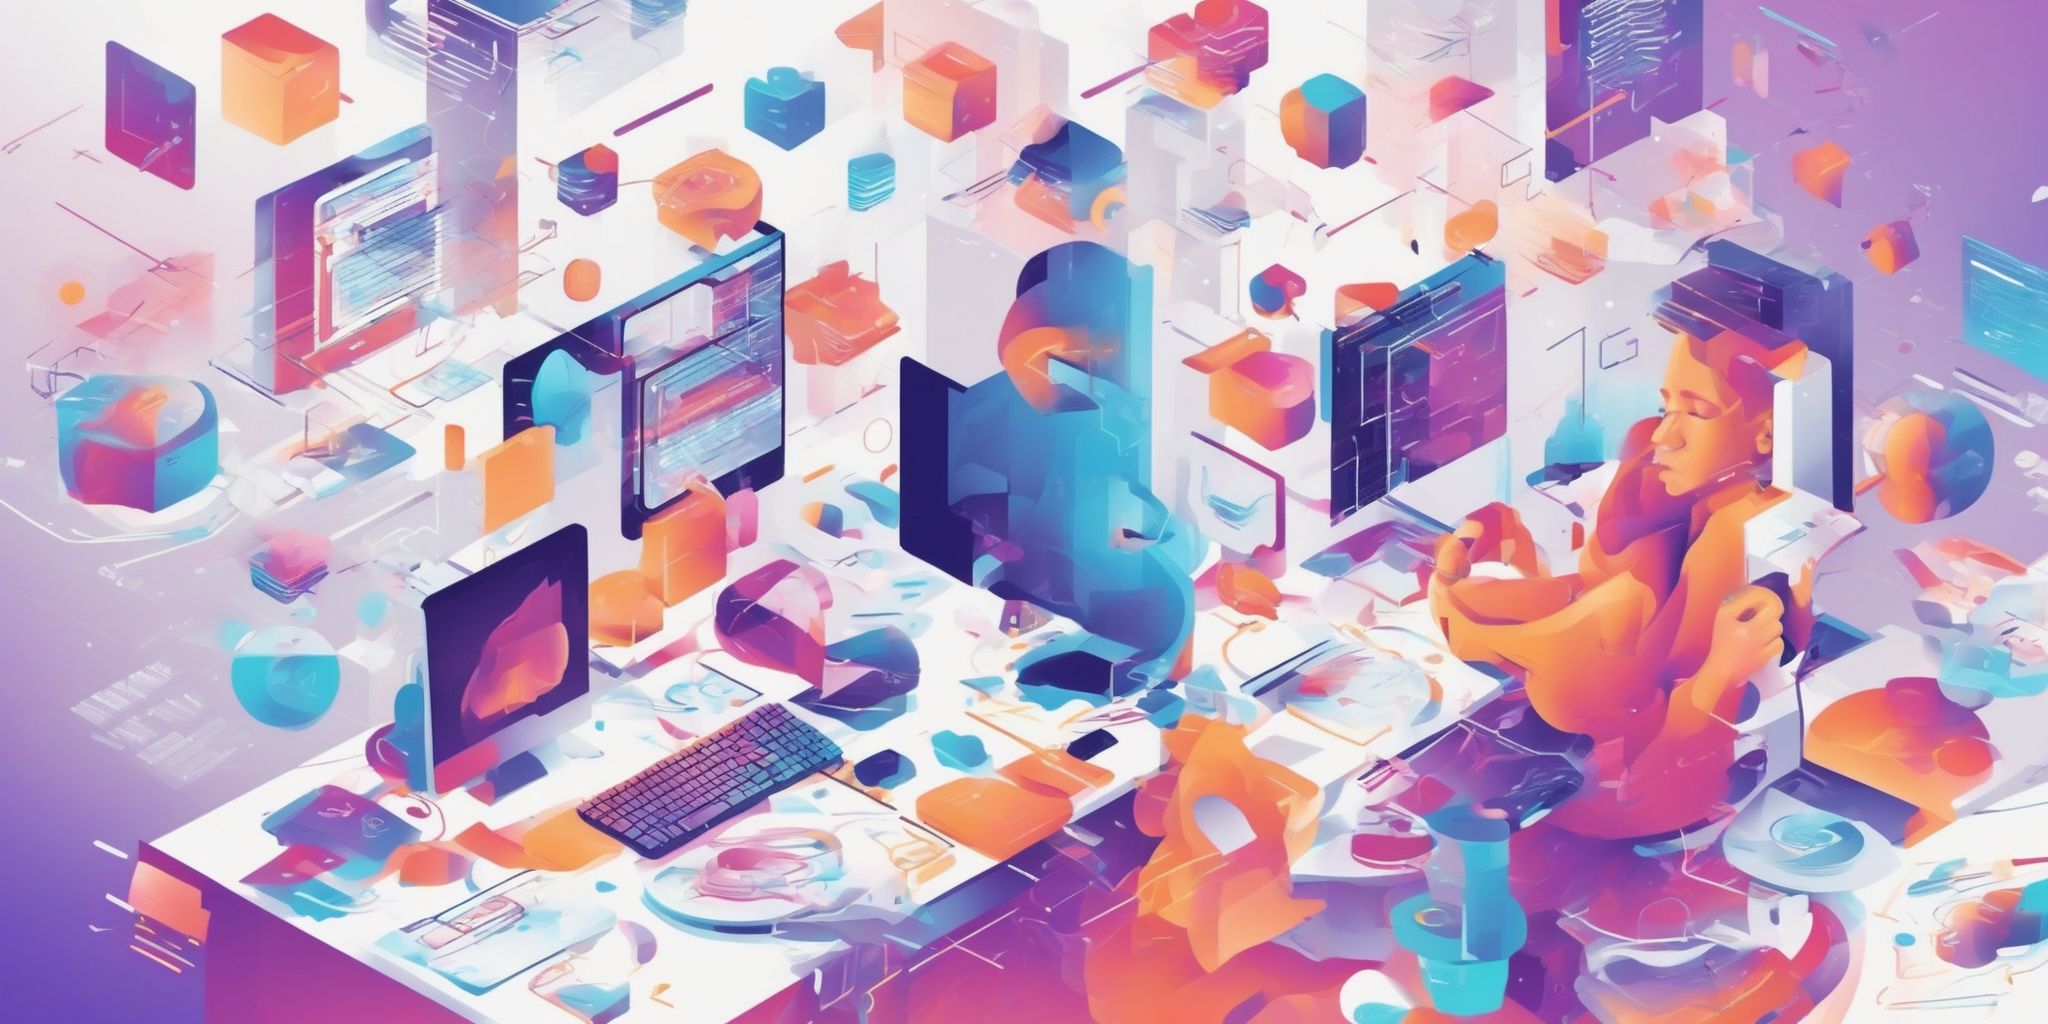 Data overload in illustration style with gradients and white background